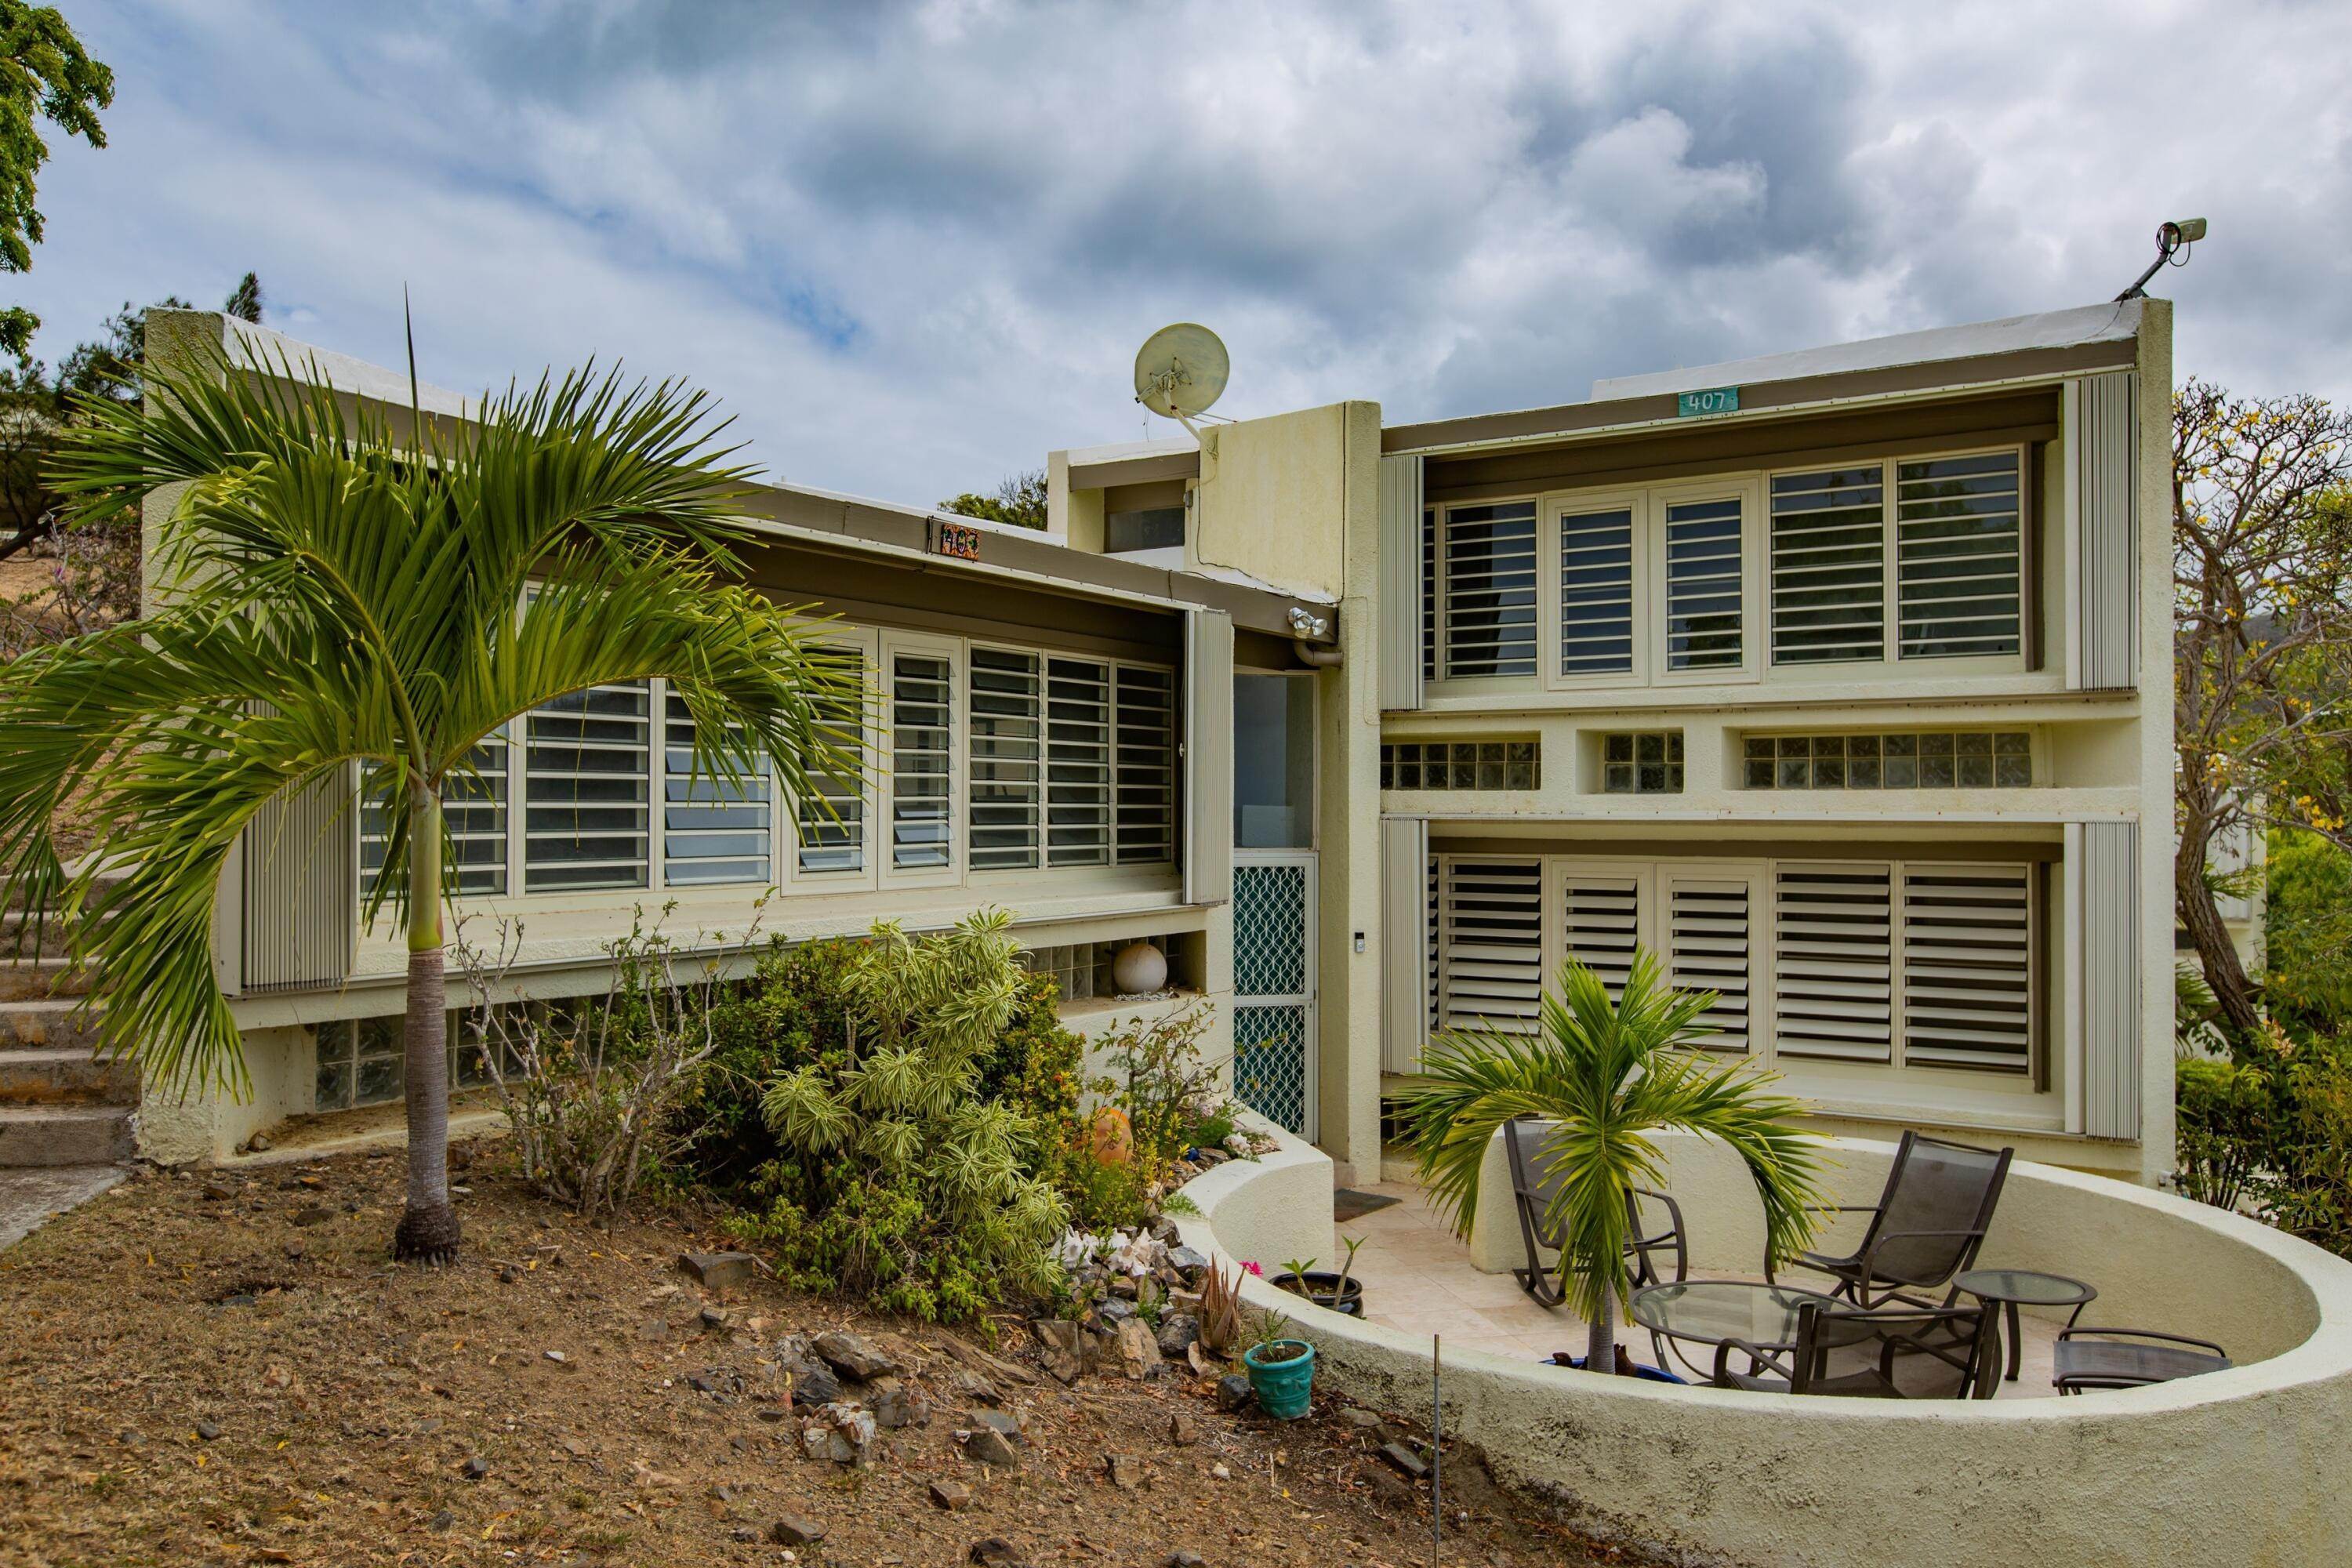 14. Condominiums for Sale at 407 Teagues Bay EB St Croix, Virgin Islands 00820 United States Virgin Islands